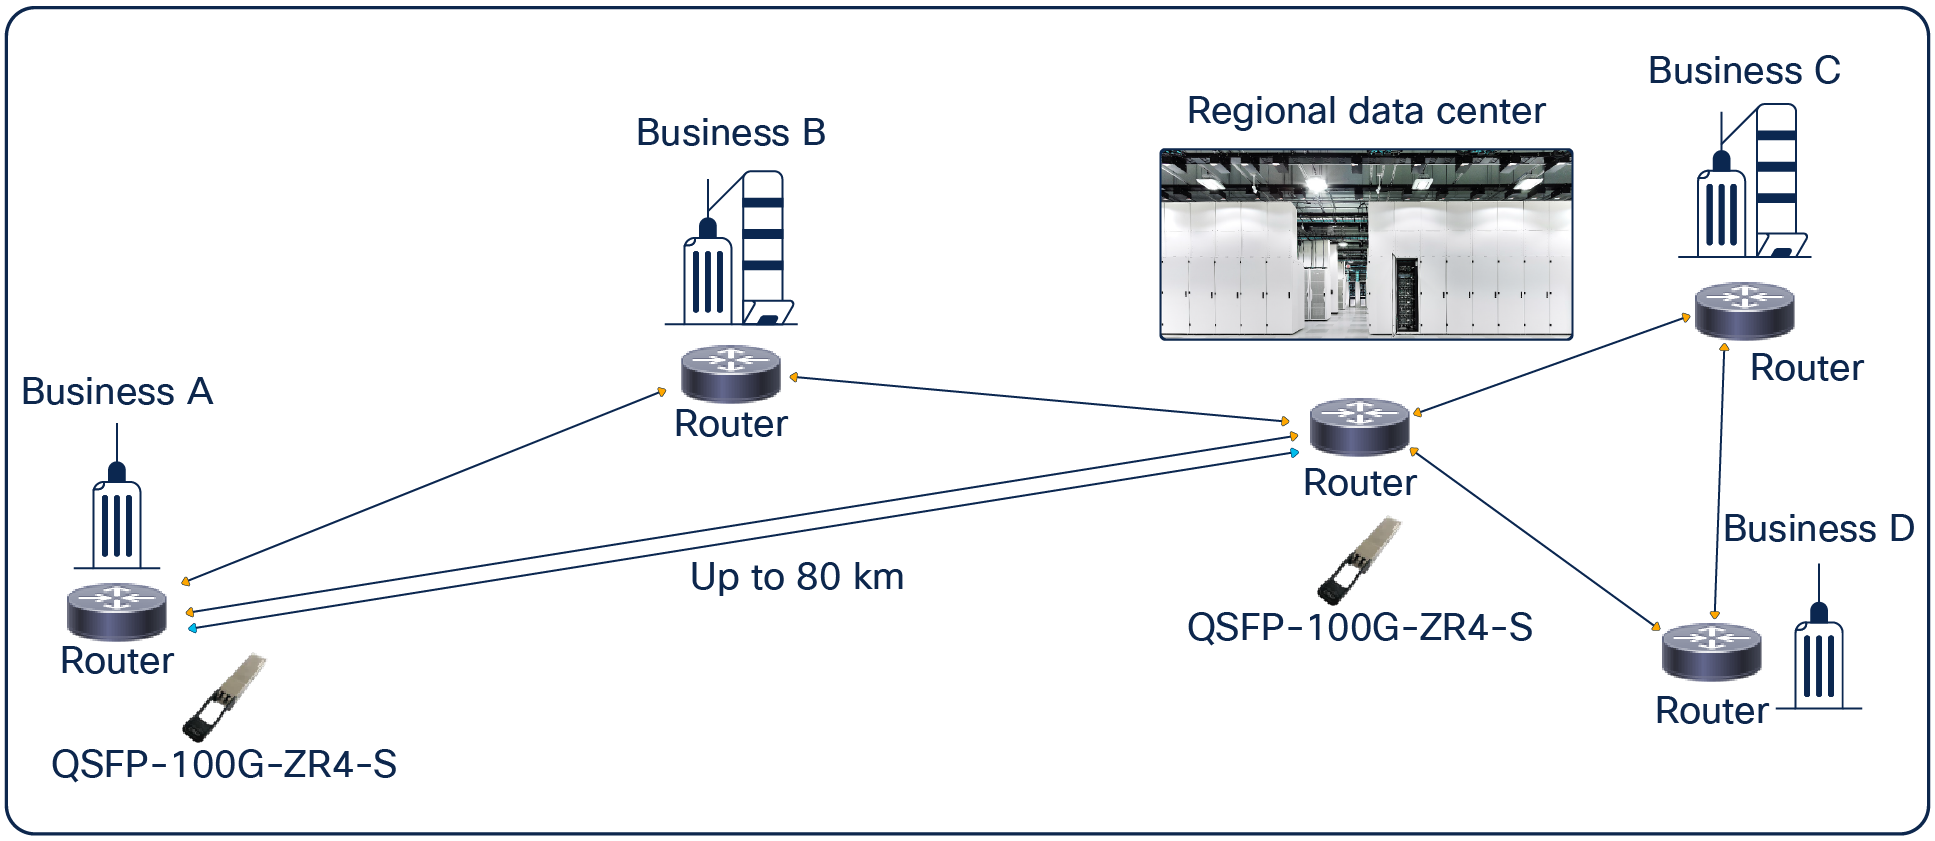 Connecting to regional data center application using the QSFP-100G-ZR4-S